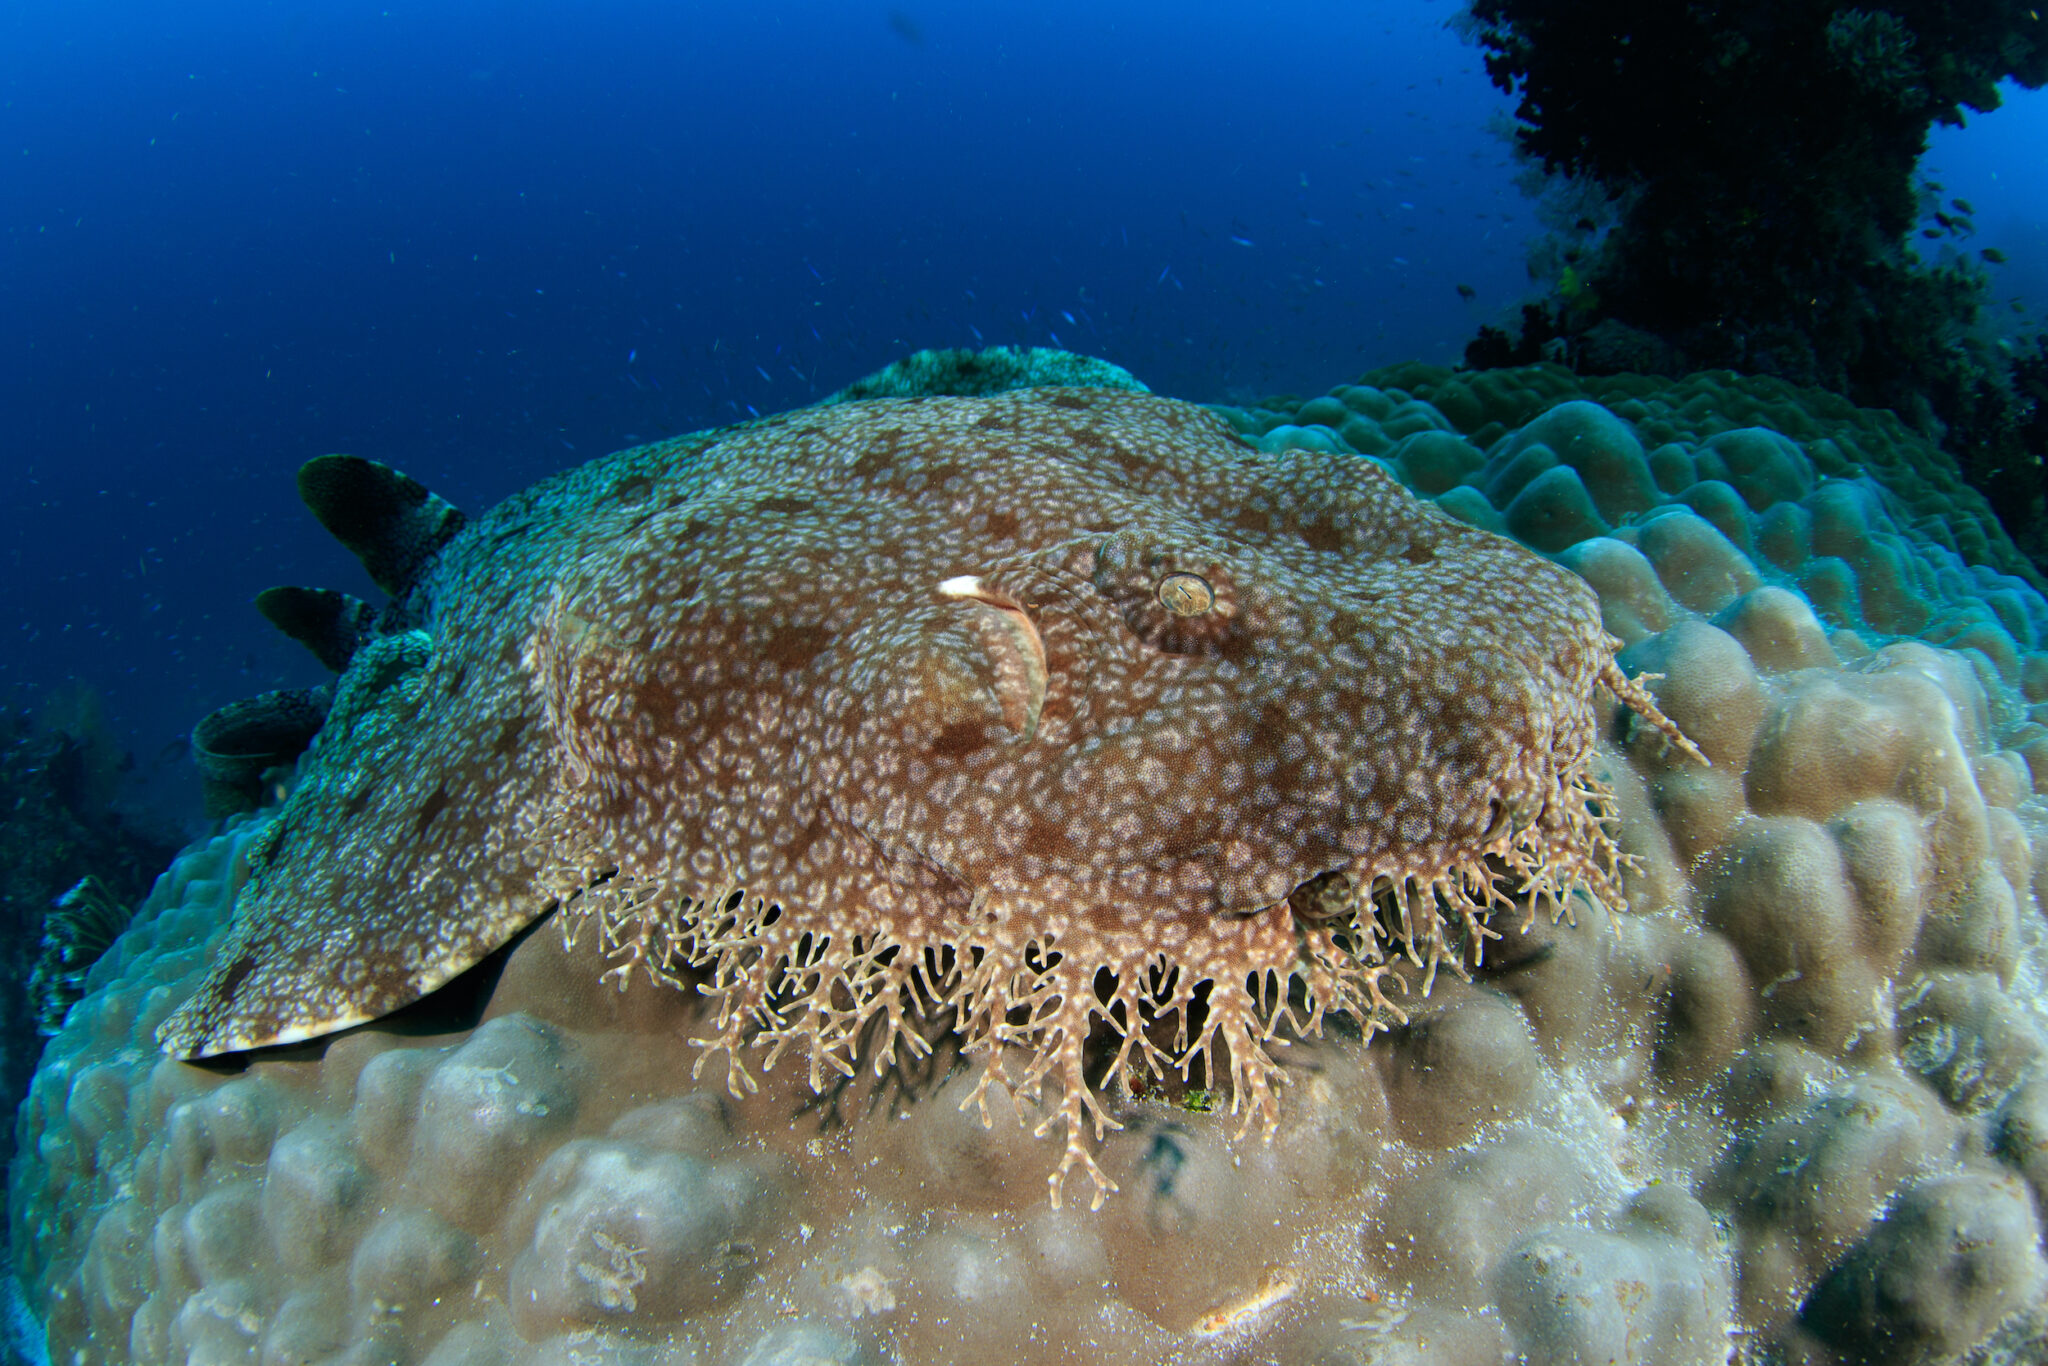 Tasslled Wobbegong resting on a coral block. Underwater image taken scuba diving in Indonesia